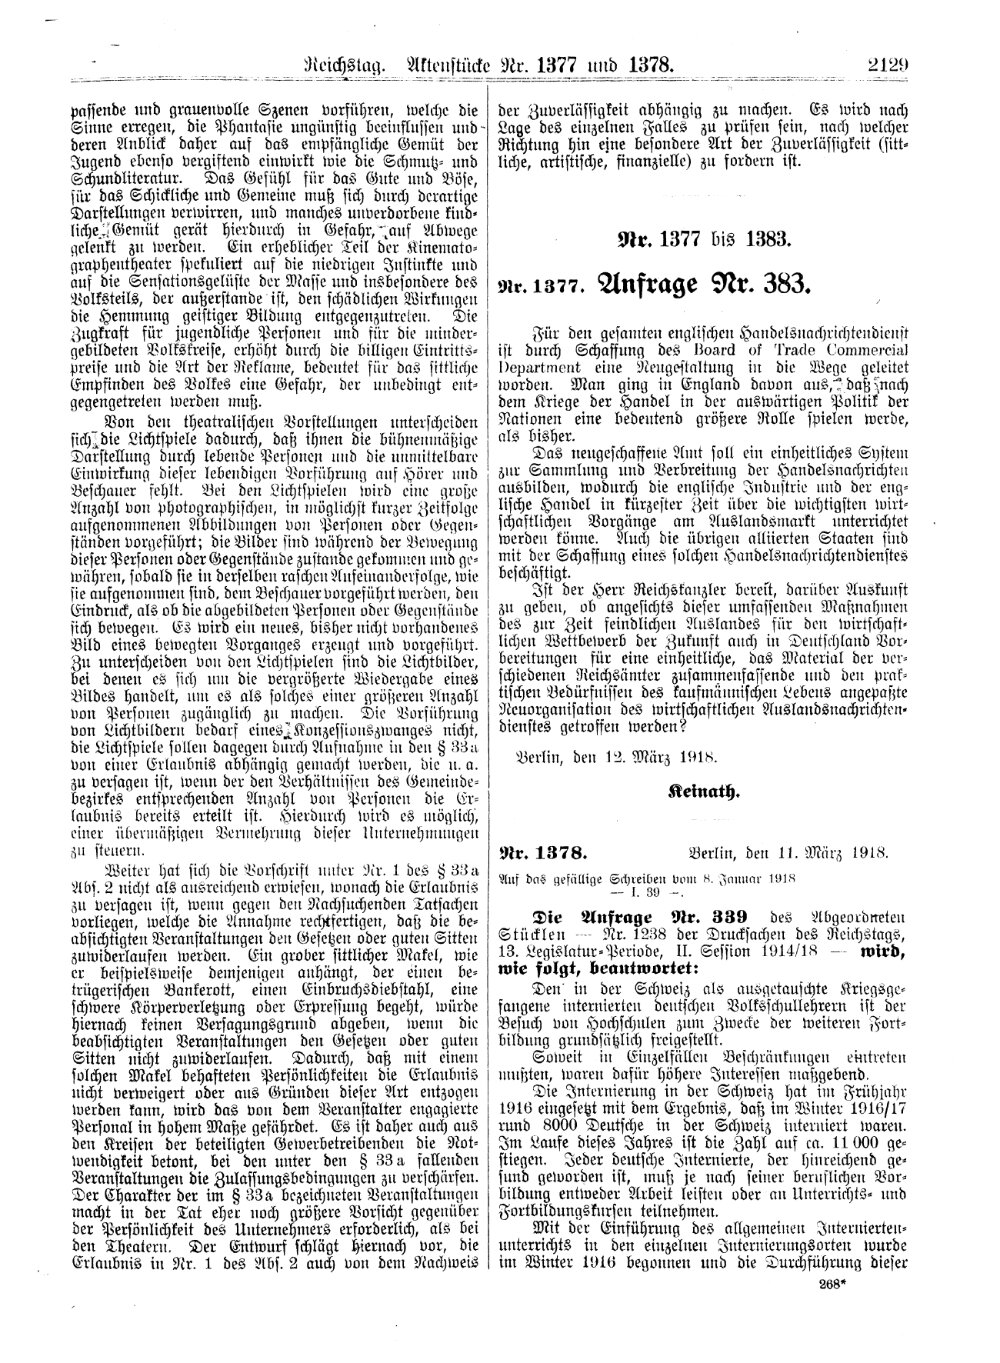 Scan of page 2129